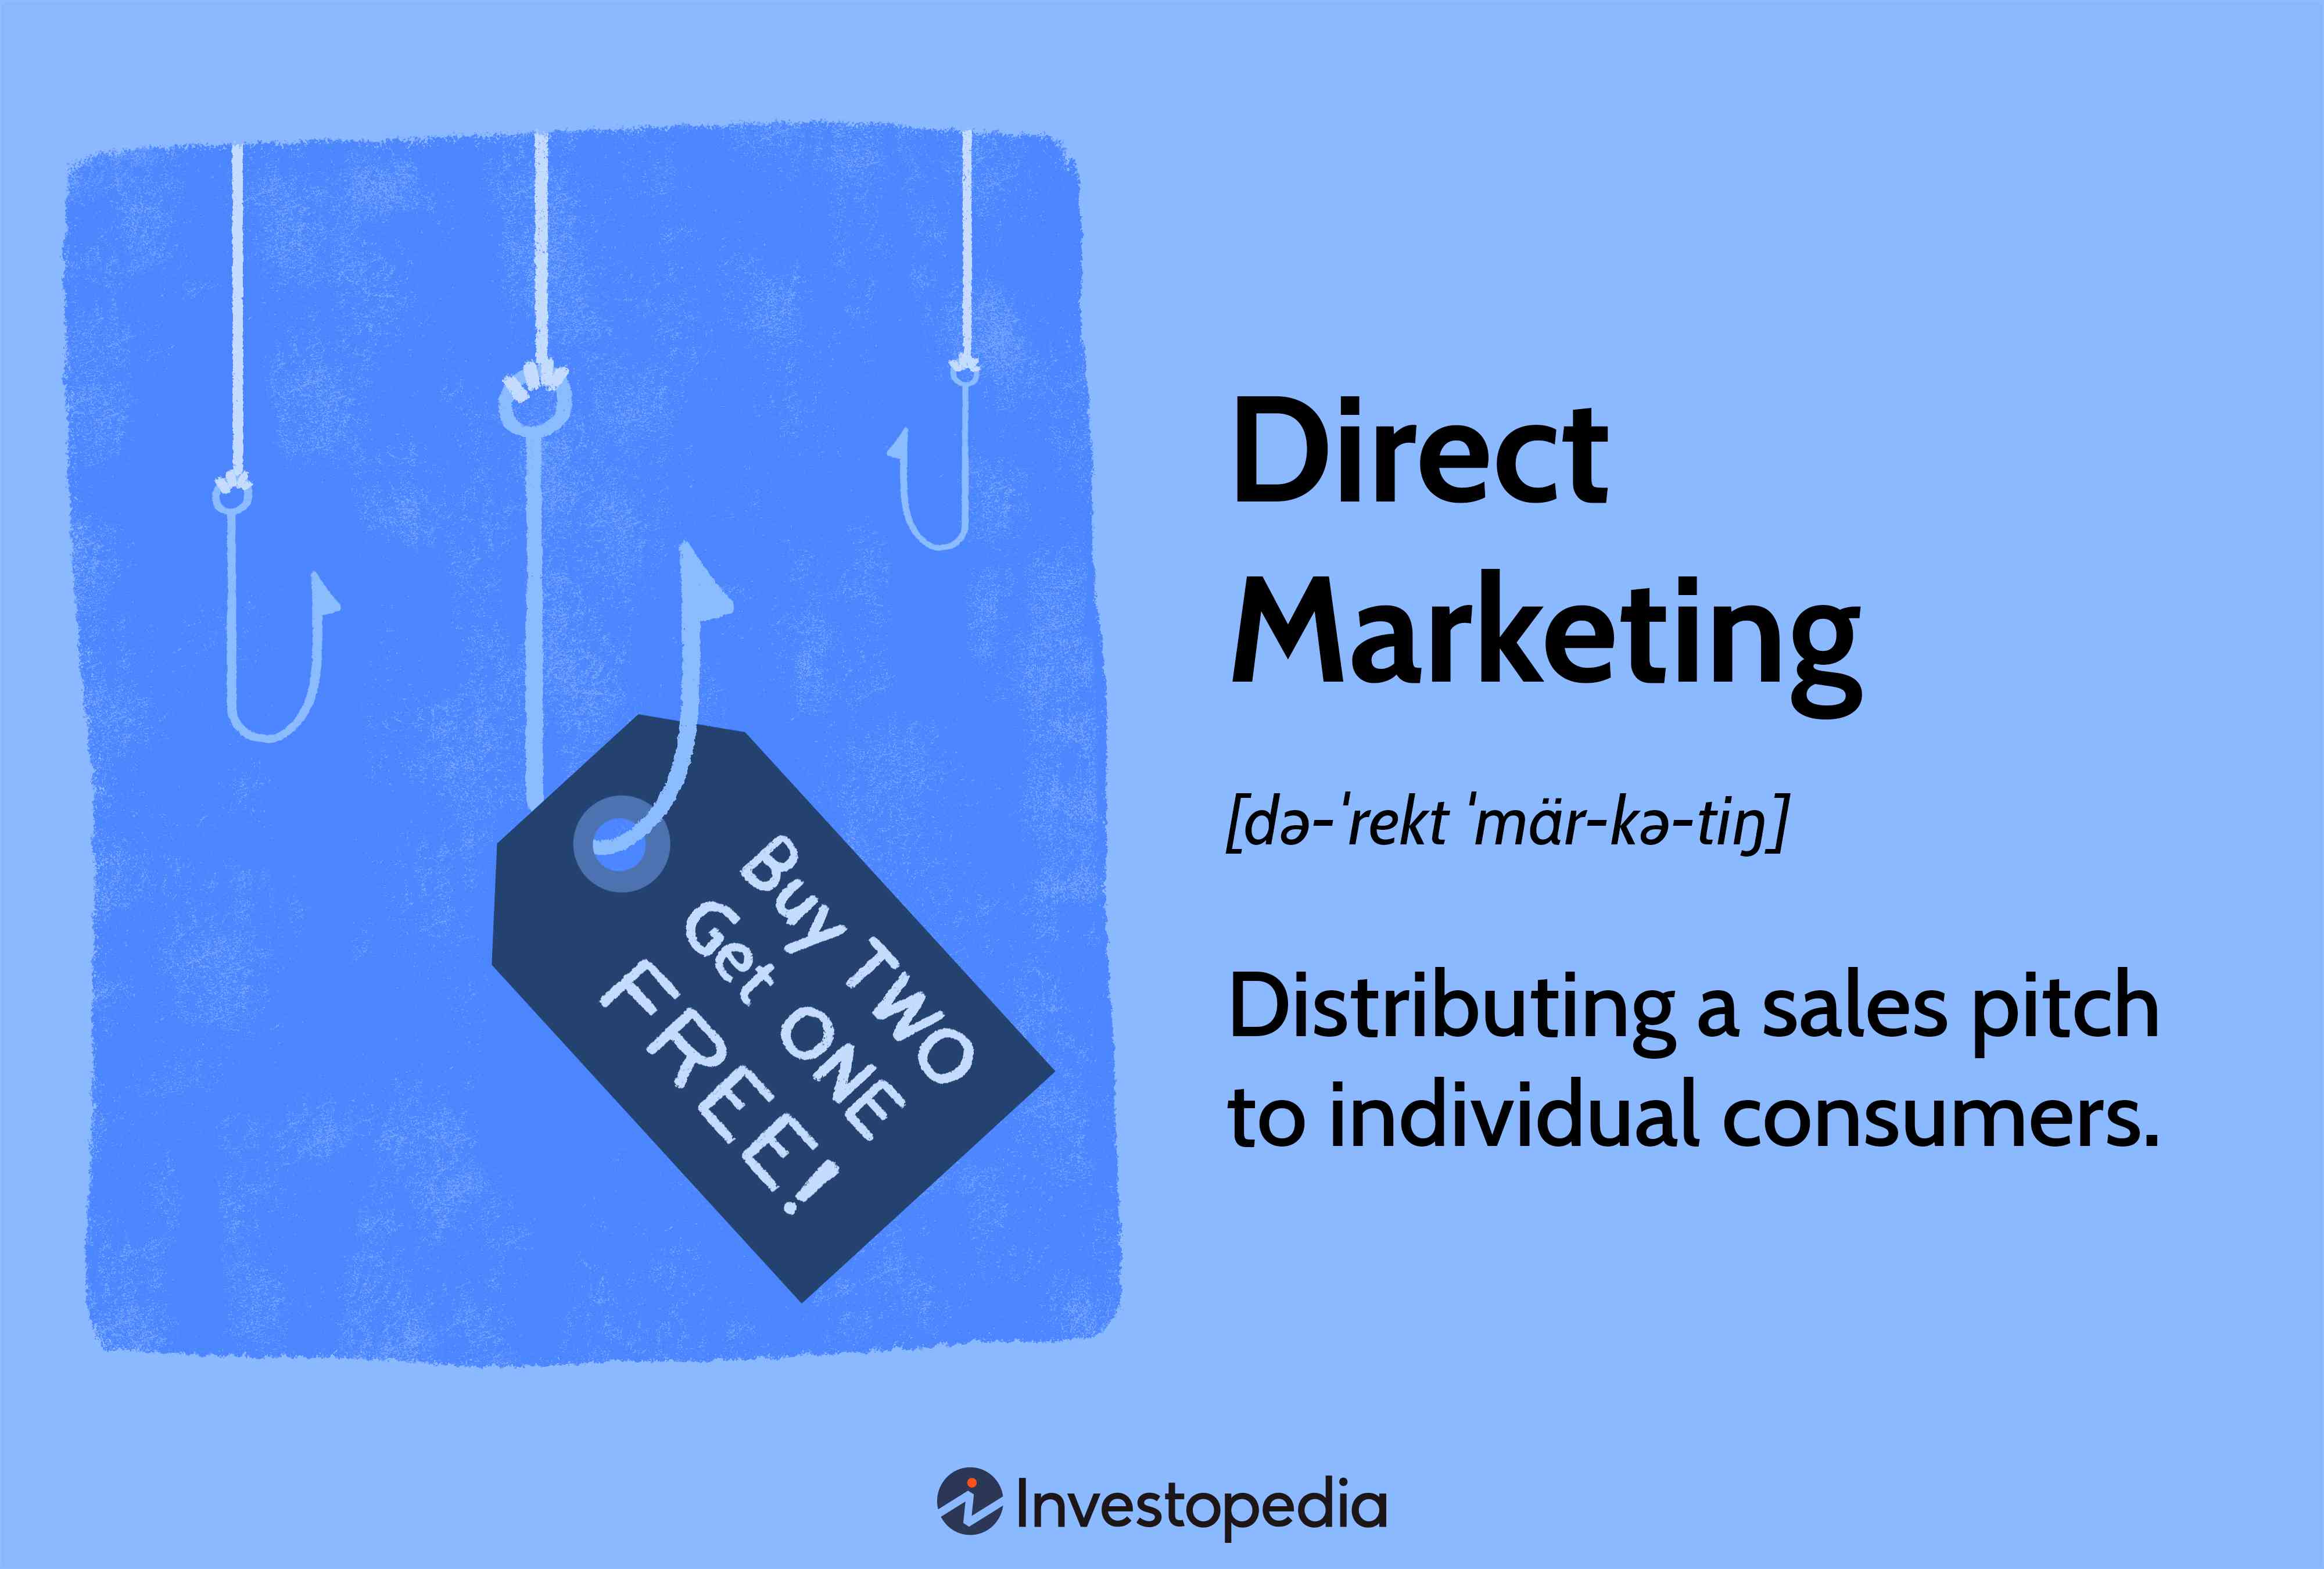 Direct Marketing: Distributing a sales pitch to individual consumers.